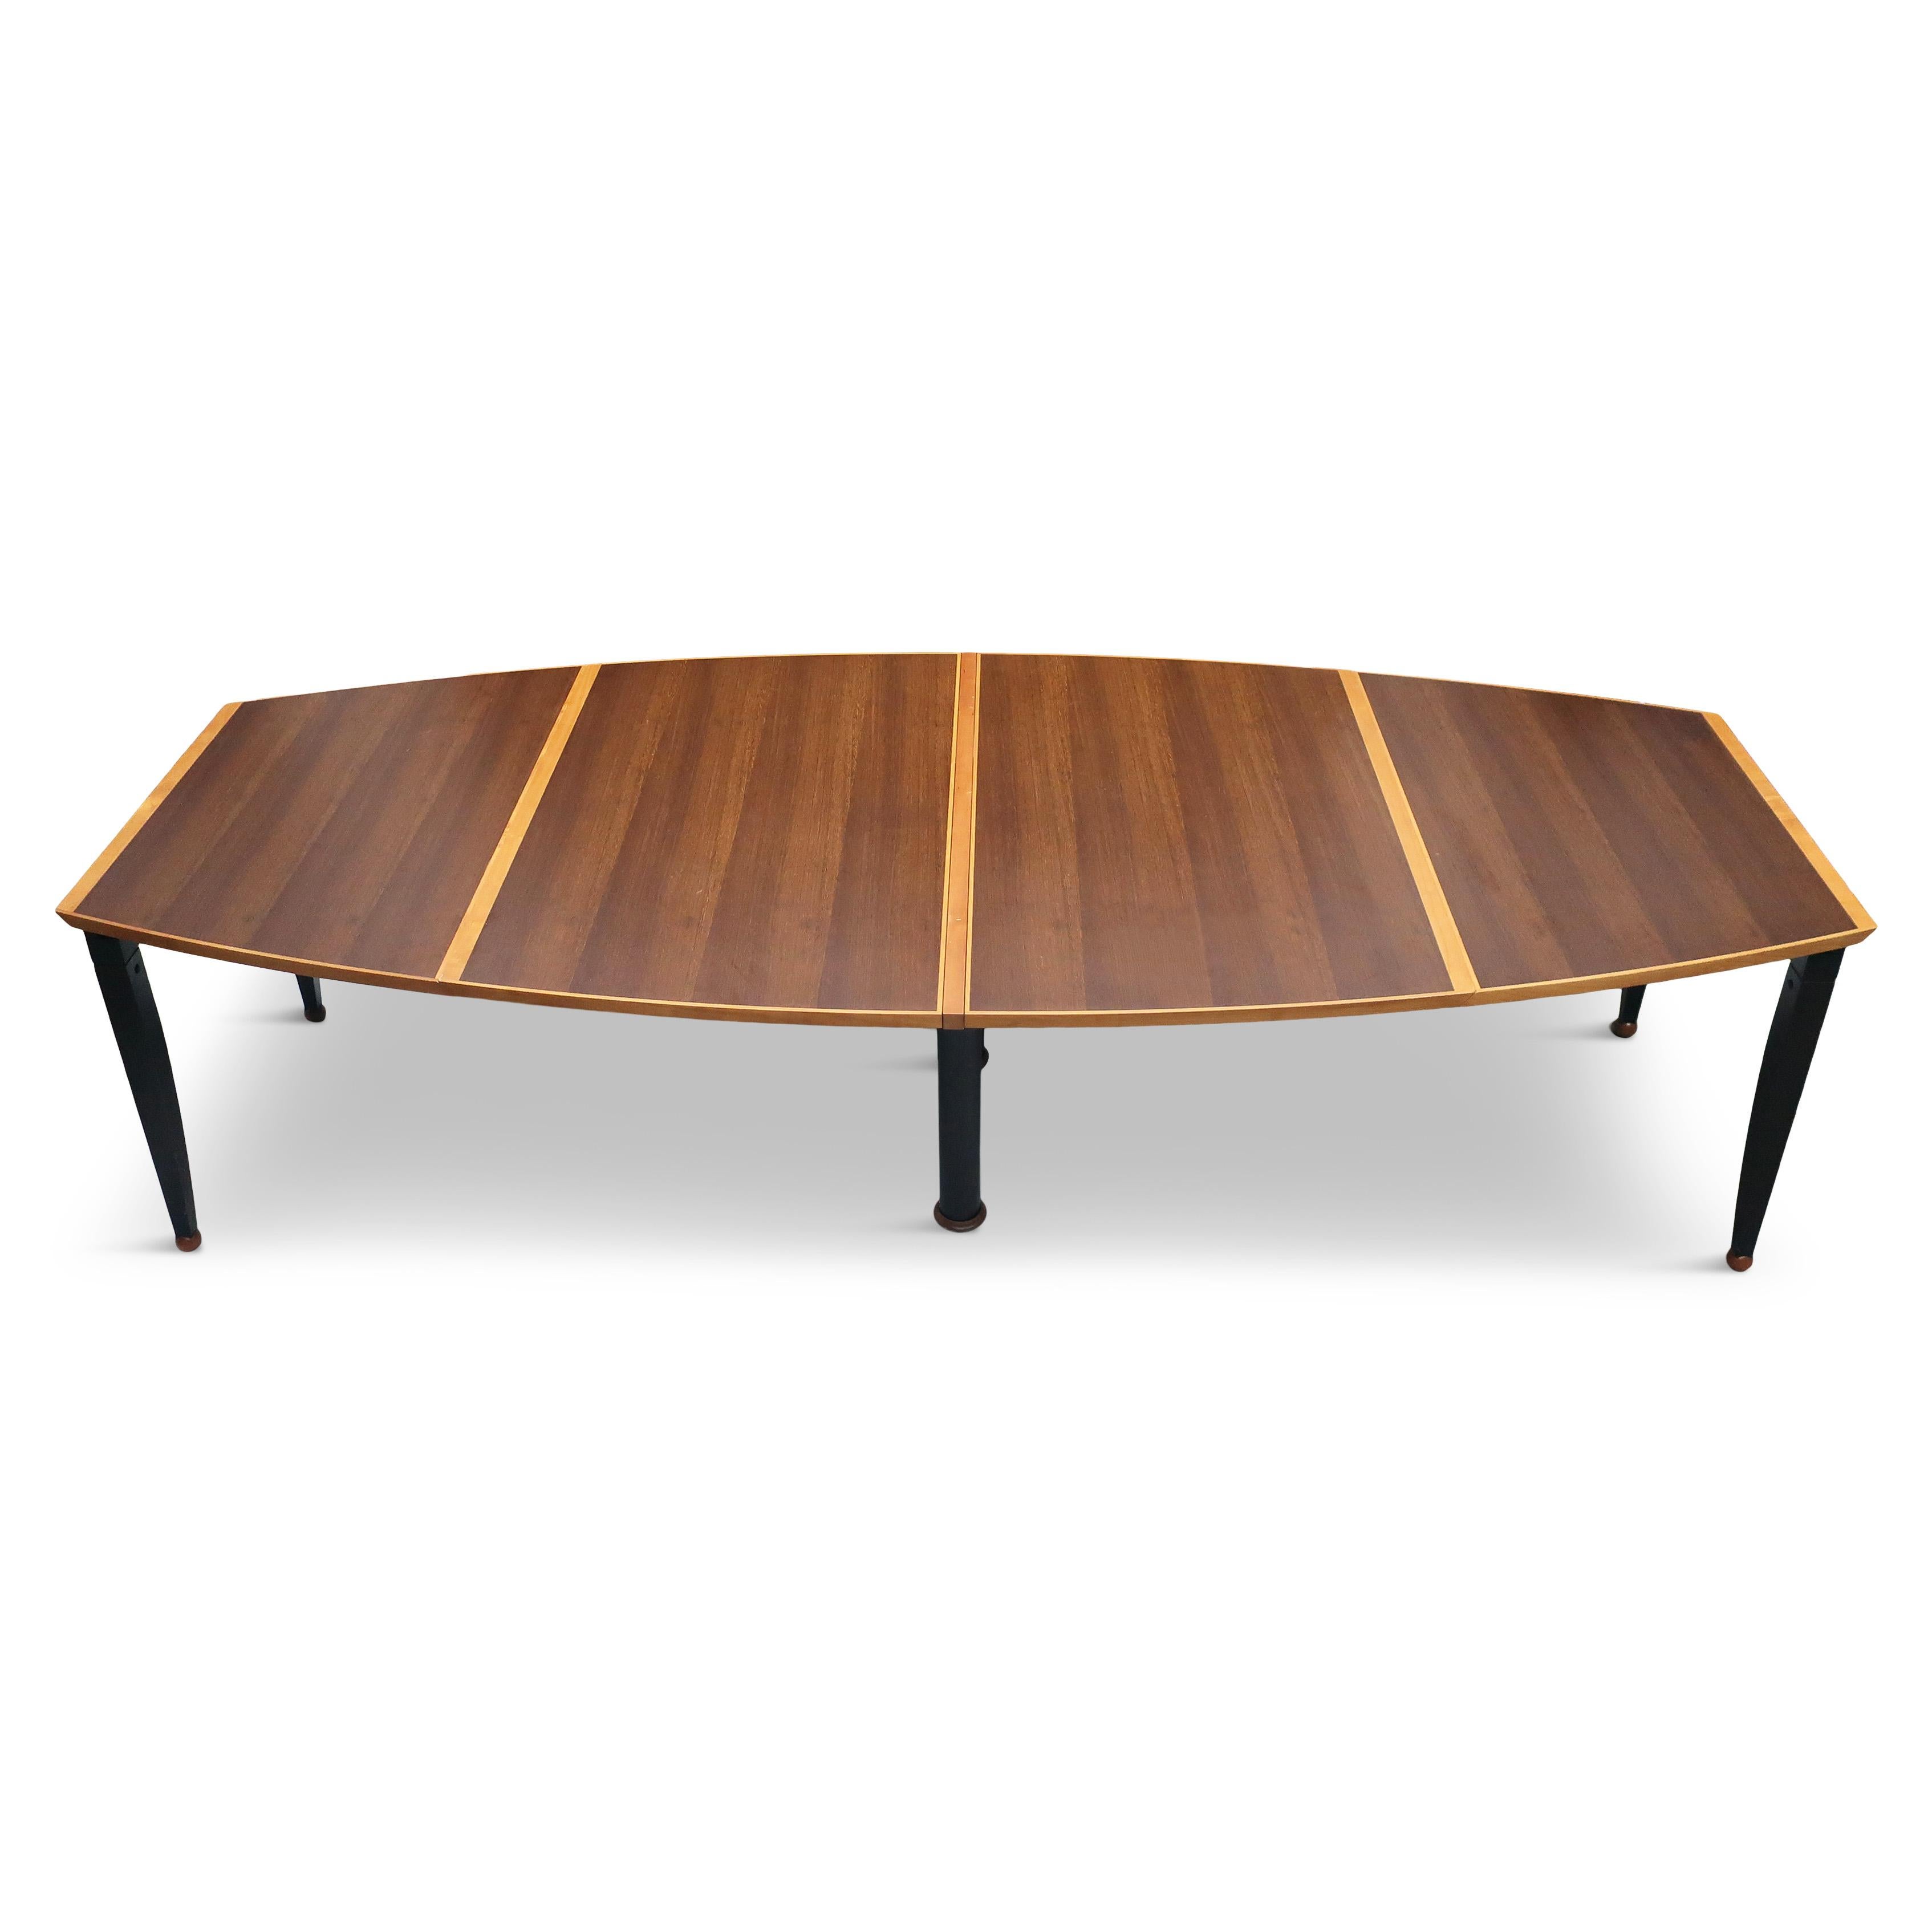 Tabula Magna Dining Table by Oscar Tosquets Blanca for Driade Aleph, '1991' In Good Condition For Sale In Brooklyn, NY